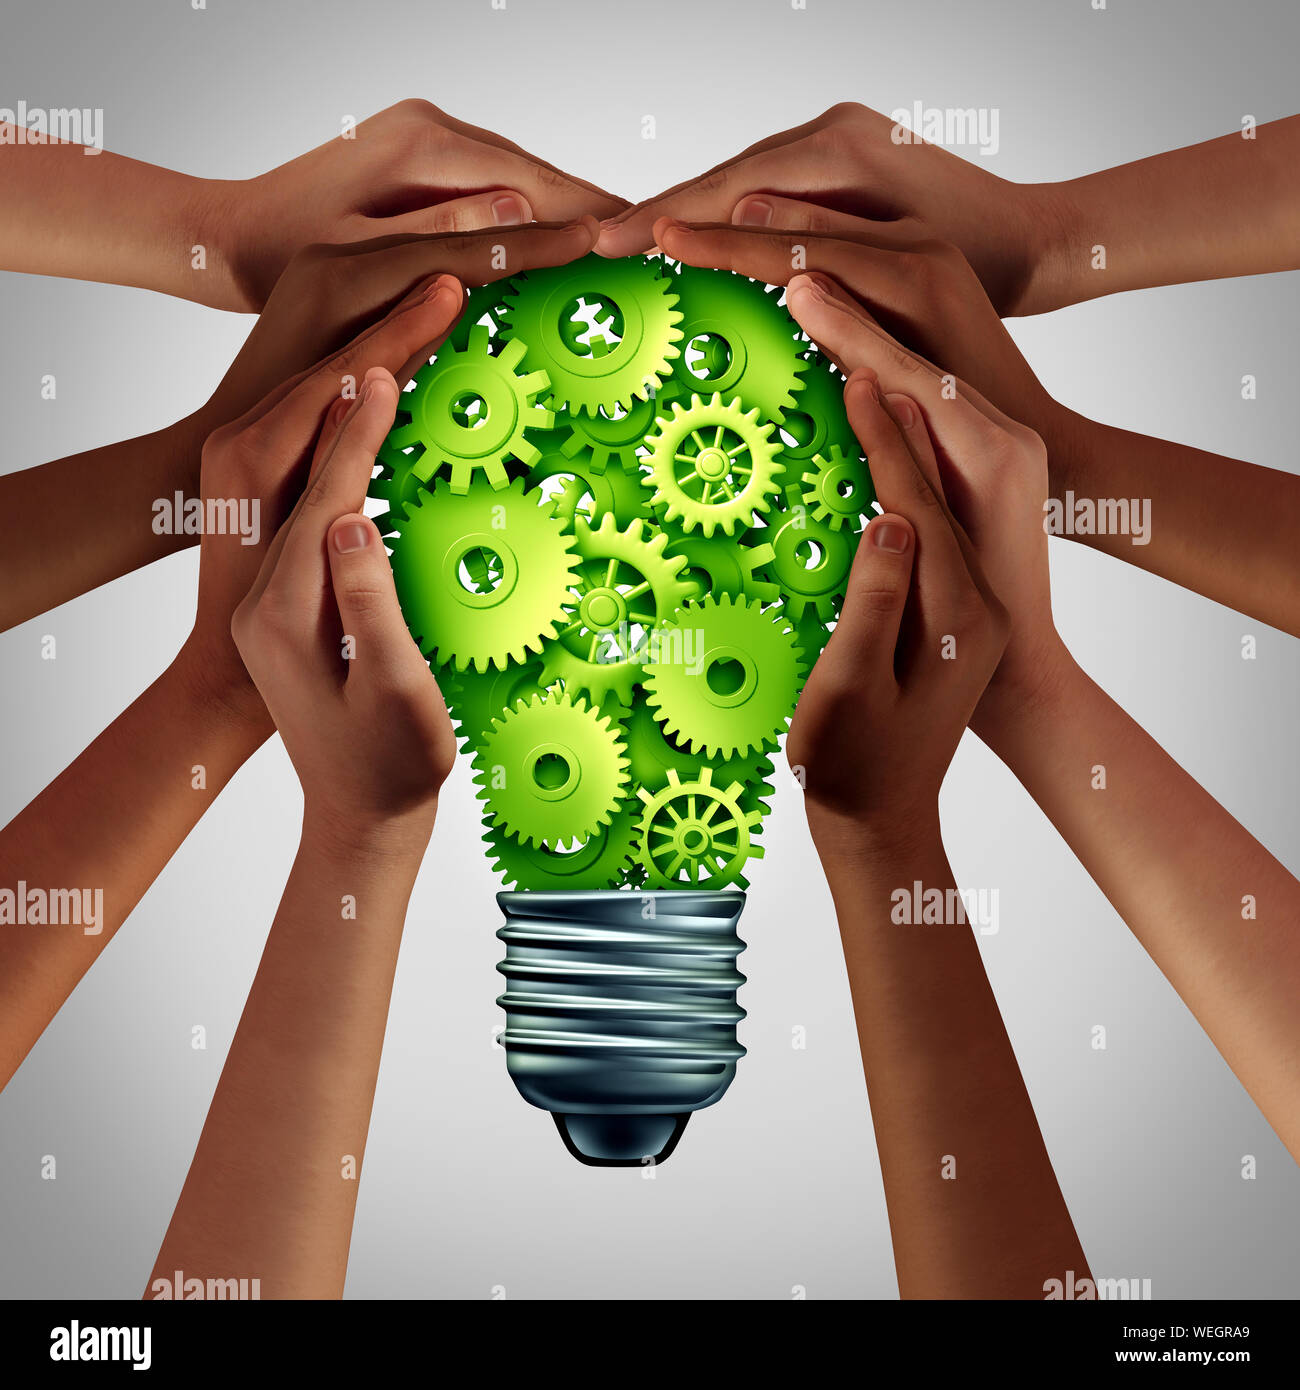 Electric power concept and energy efficiency idea as a green solution with diverse hands holding a lightbulb for alternative fuel. Stock Photo